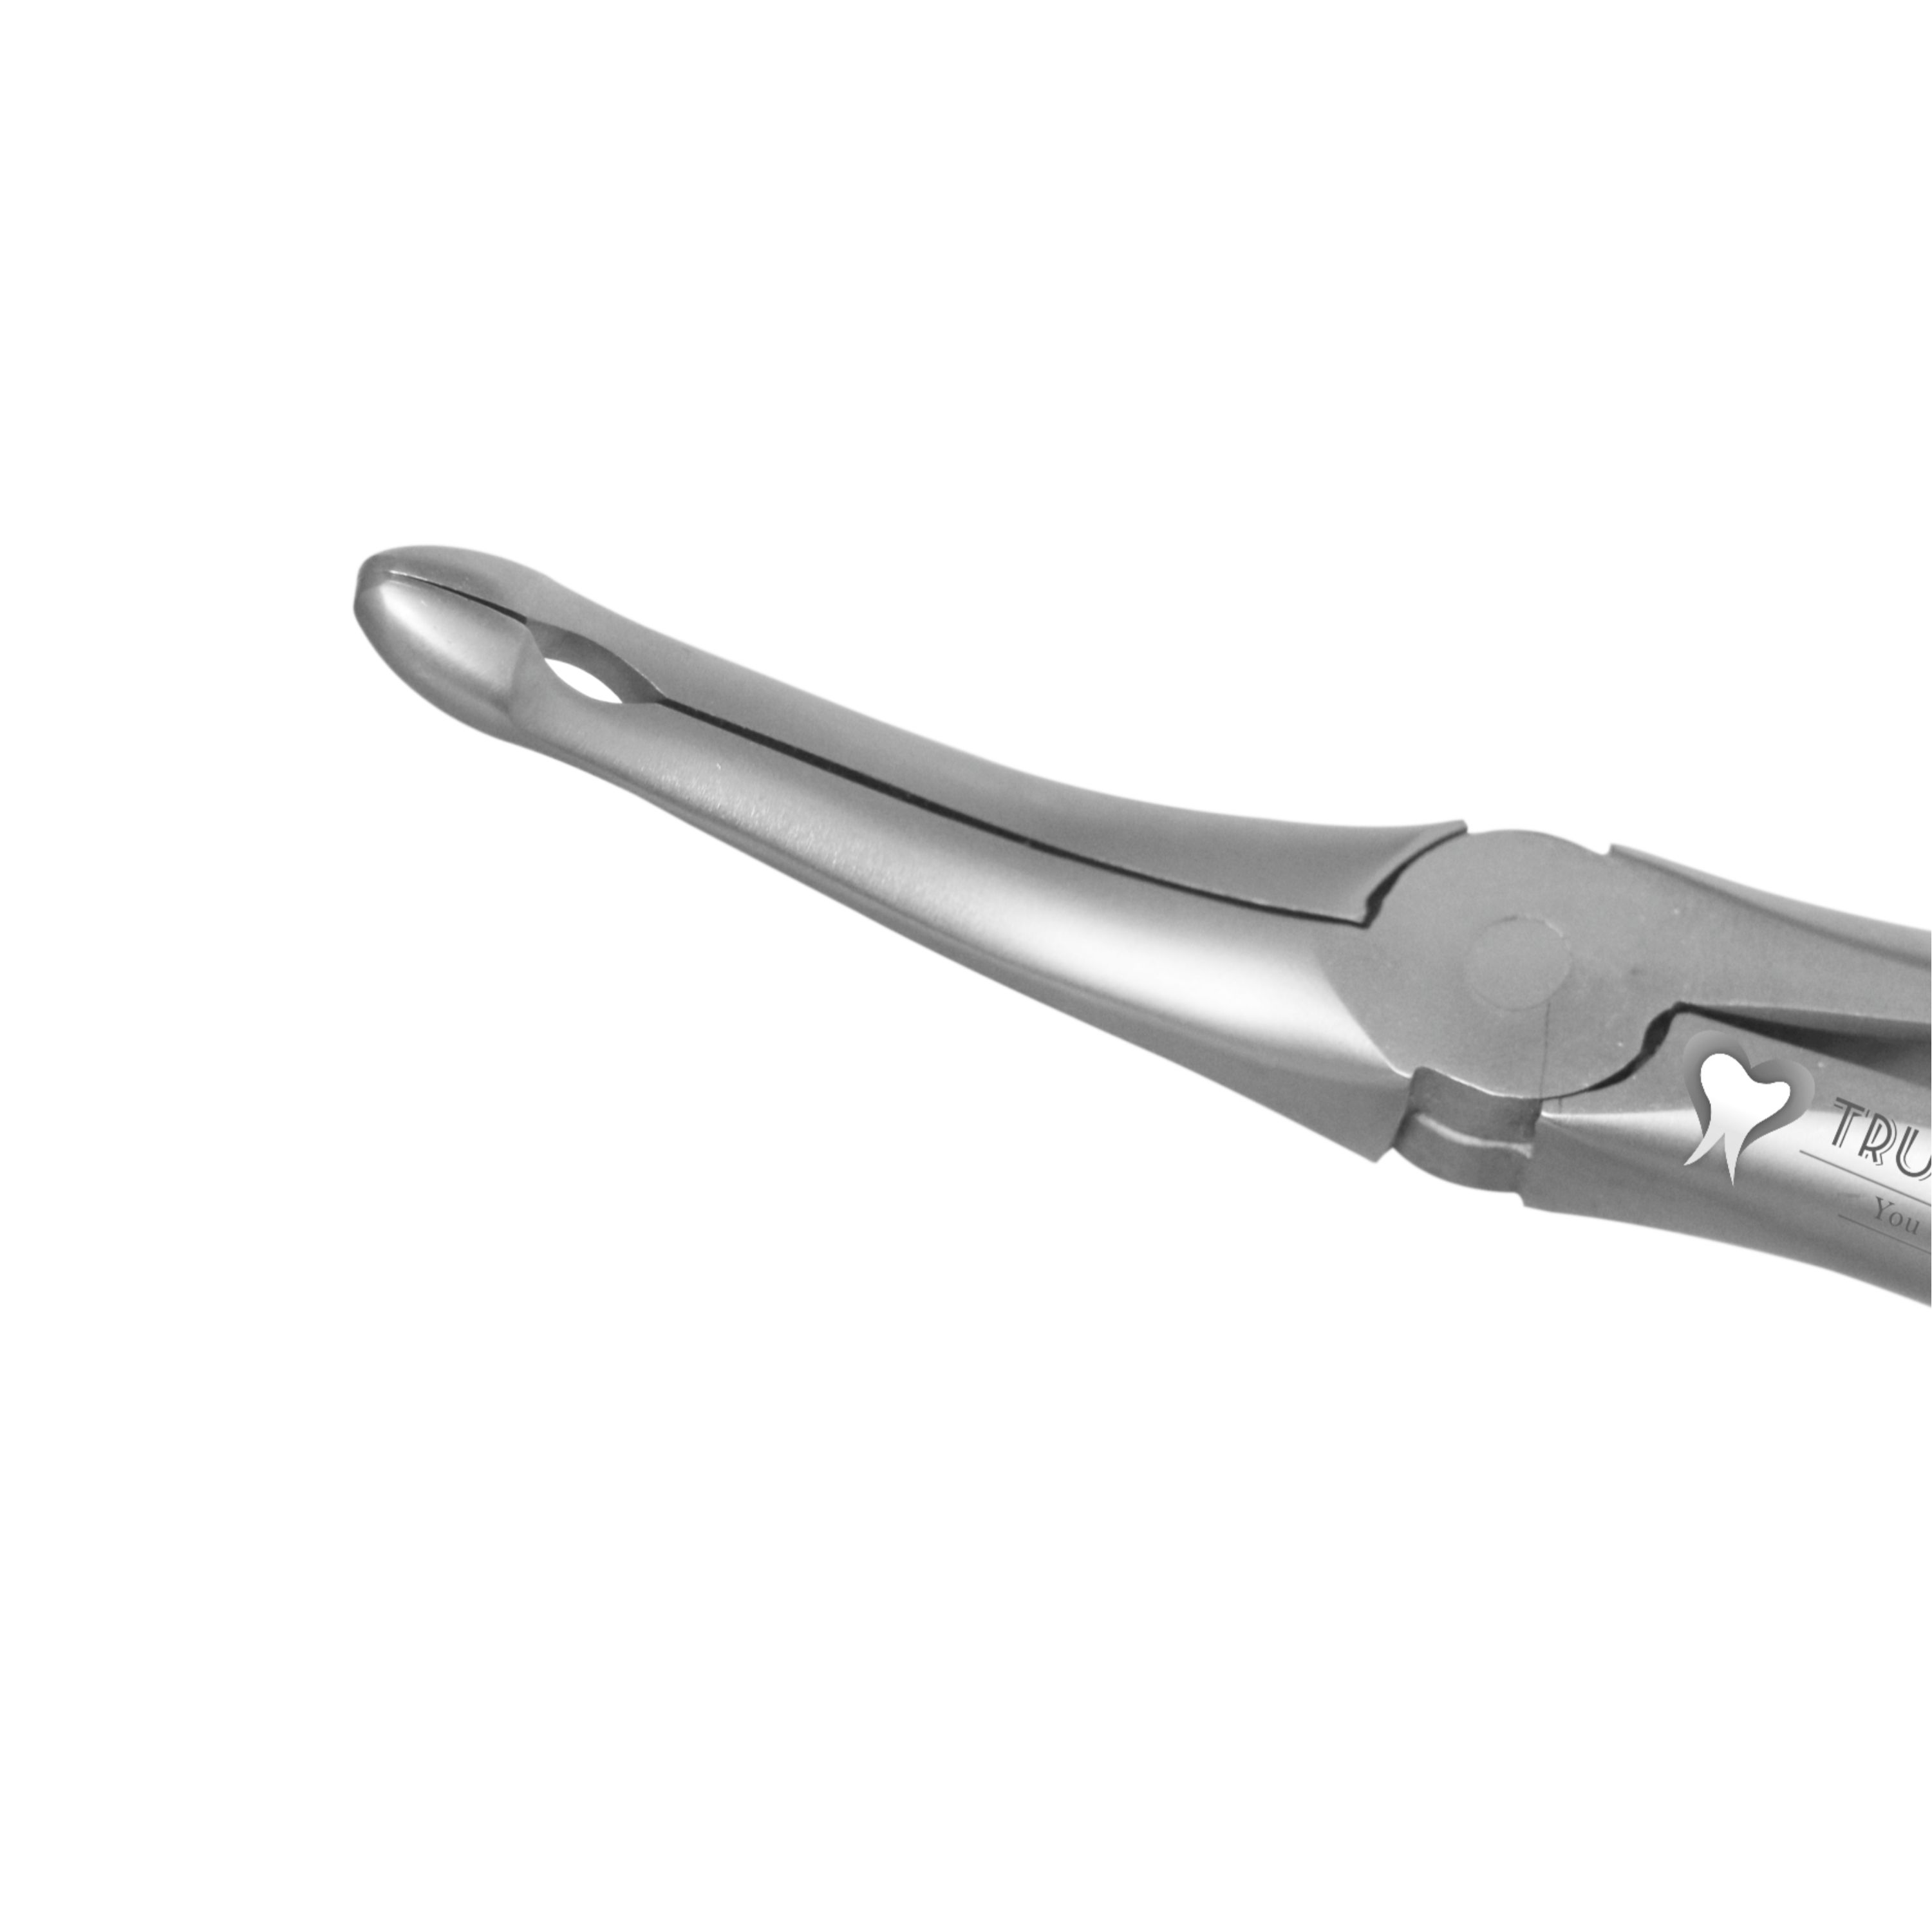 Trust & Care Secure Forcep Upper Roots Fig No. 944.00